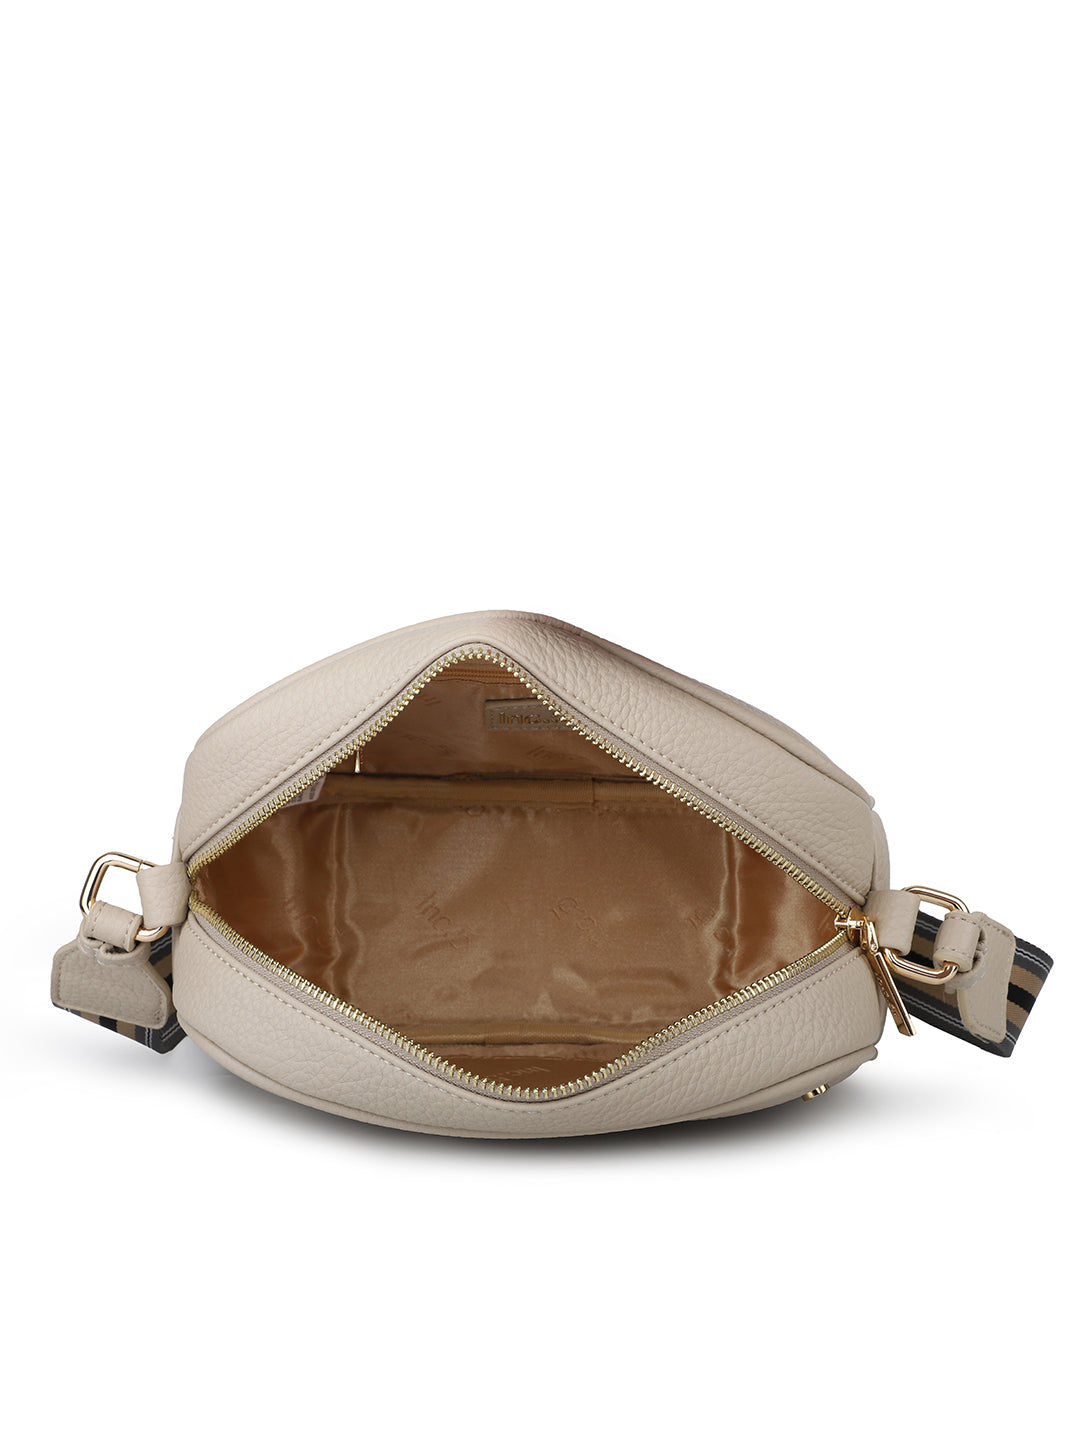 Women Off White Structured Sling Bag